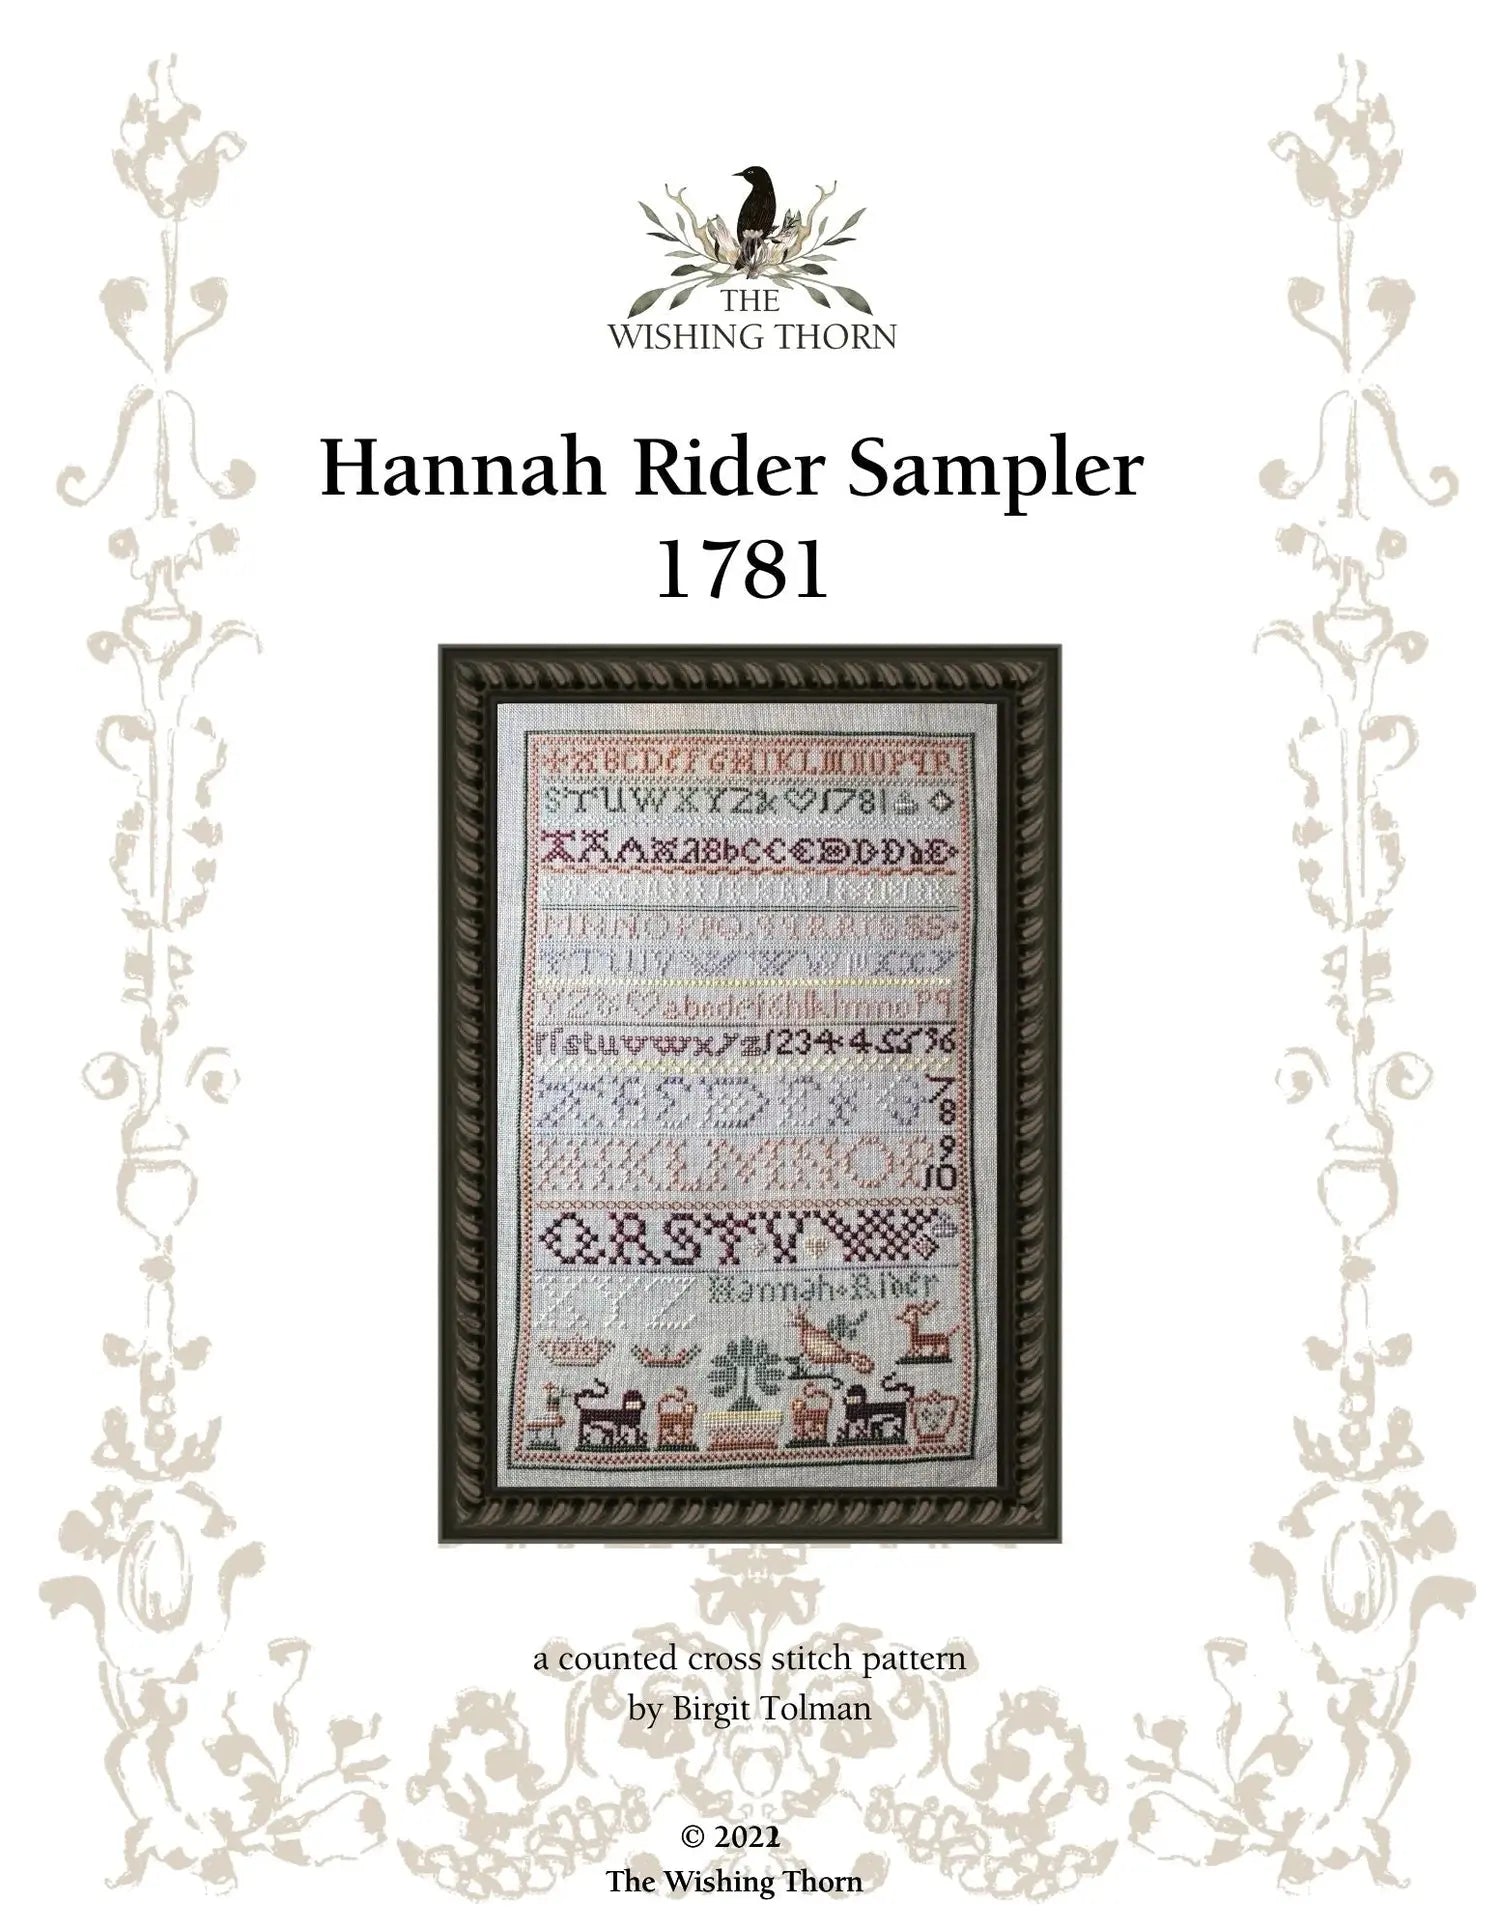 Hannah Rider Sampler 1782 by The Wishing Thorn The Wishing Thorn